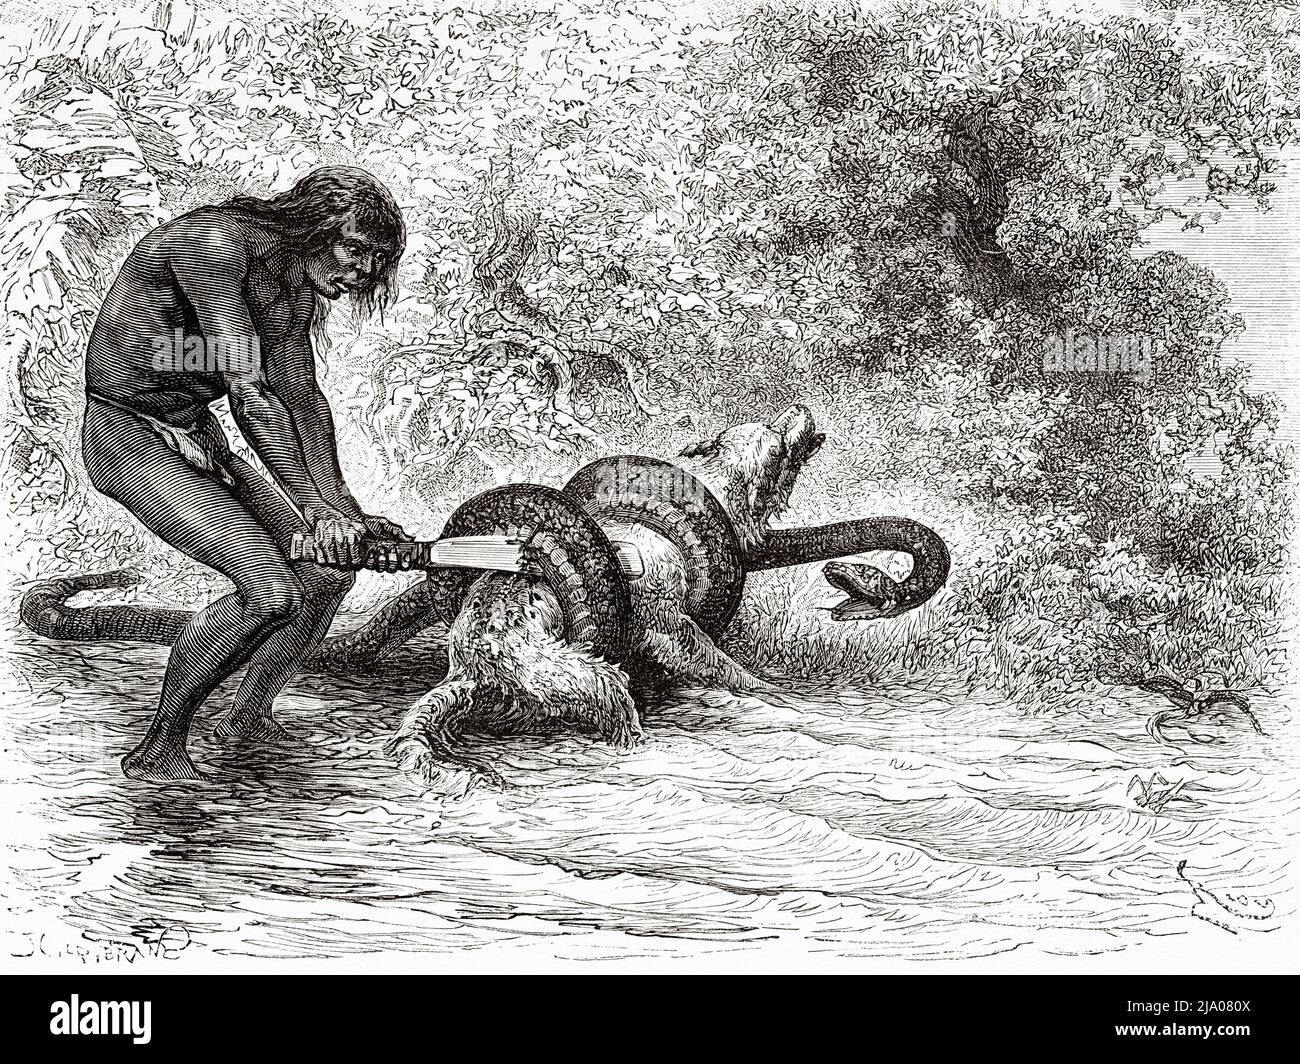 Native Boni Indians freeing a dog from the bonds of a large boa snake, French Guiana, Department of France, South America. Voyage of exploration in the interior of the Guianas 1877 by Jules Crevaux. Le Tour du Monde 1879 Stock Photo